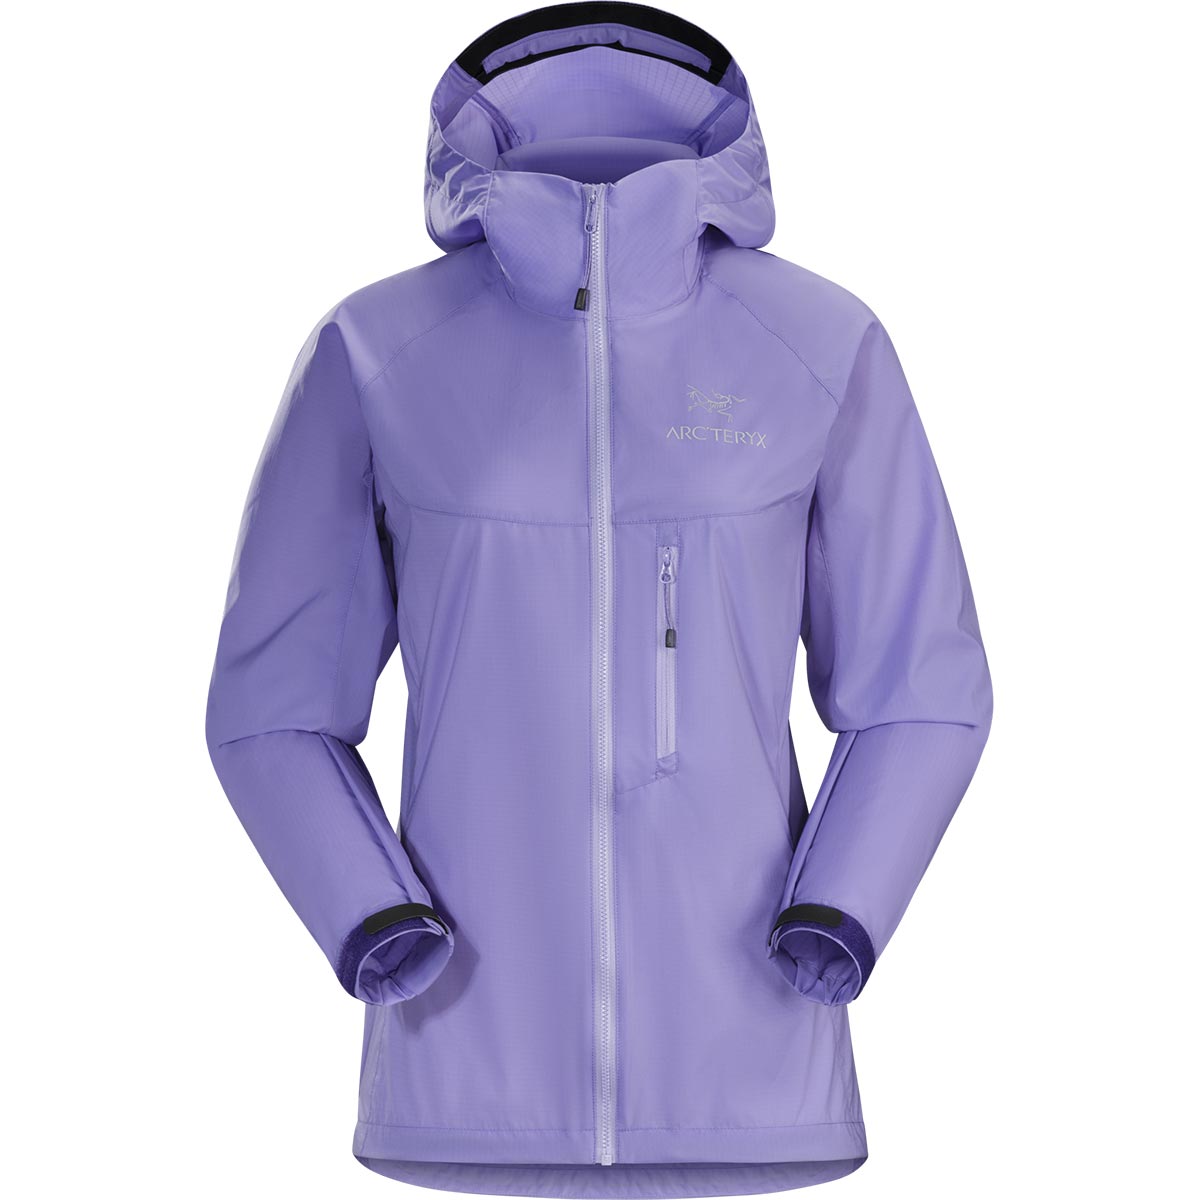 Arc'teryx Squamish Hoody, women's, discontinued Fall 2018 colors ...